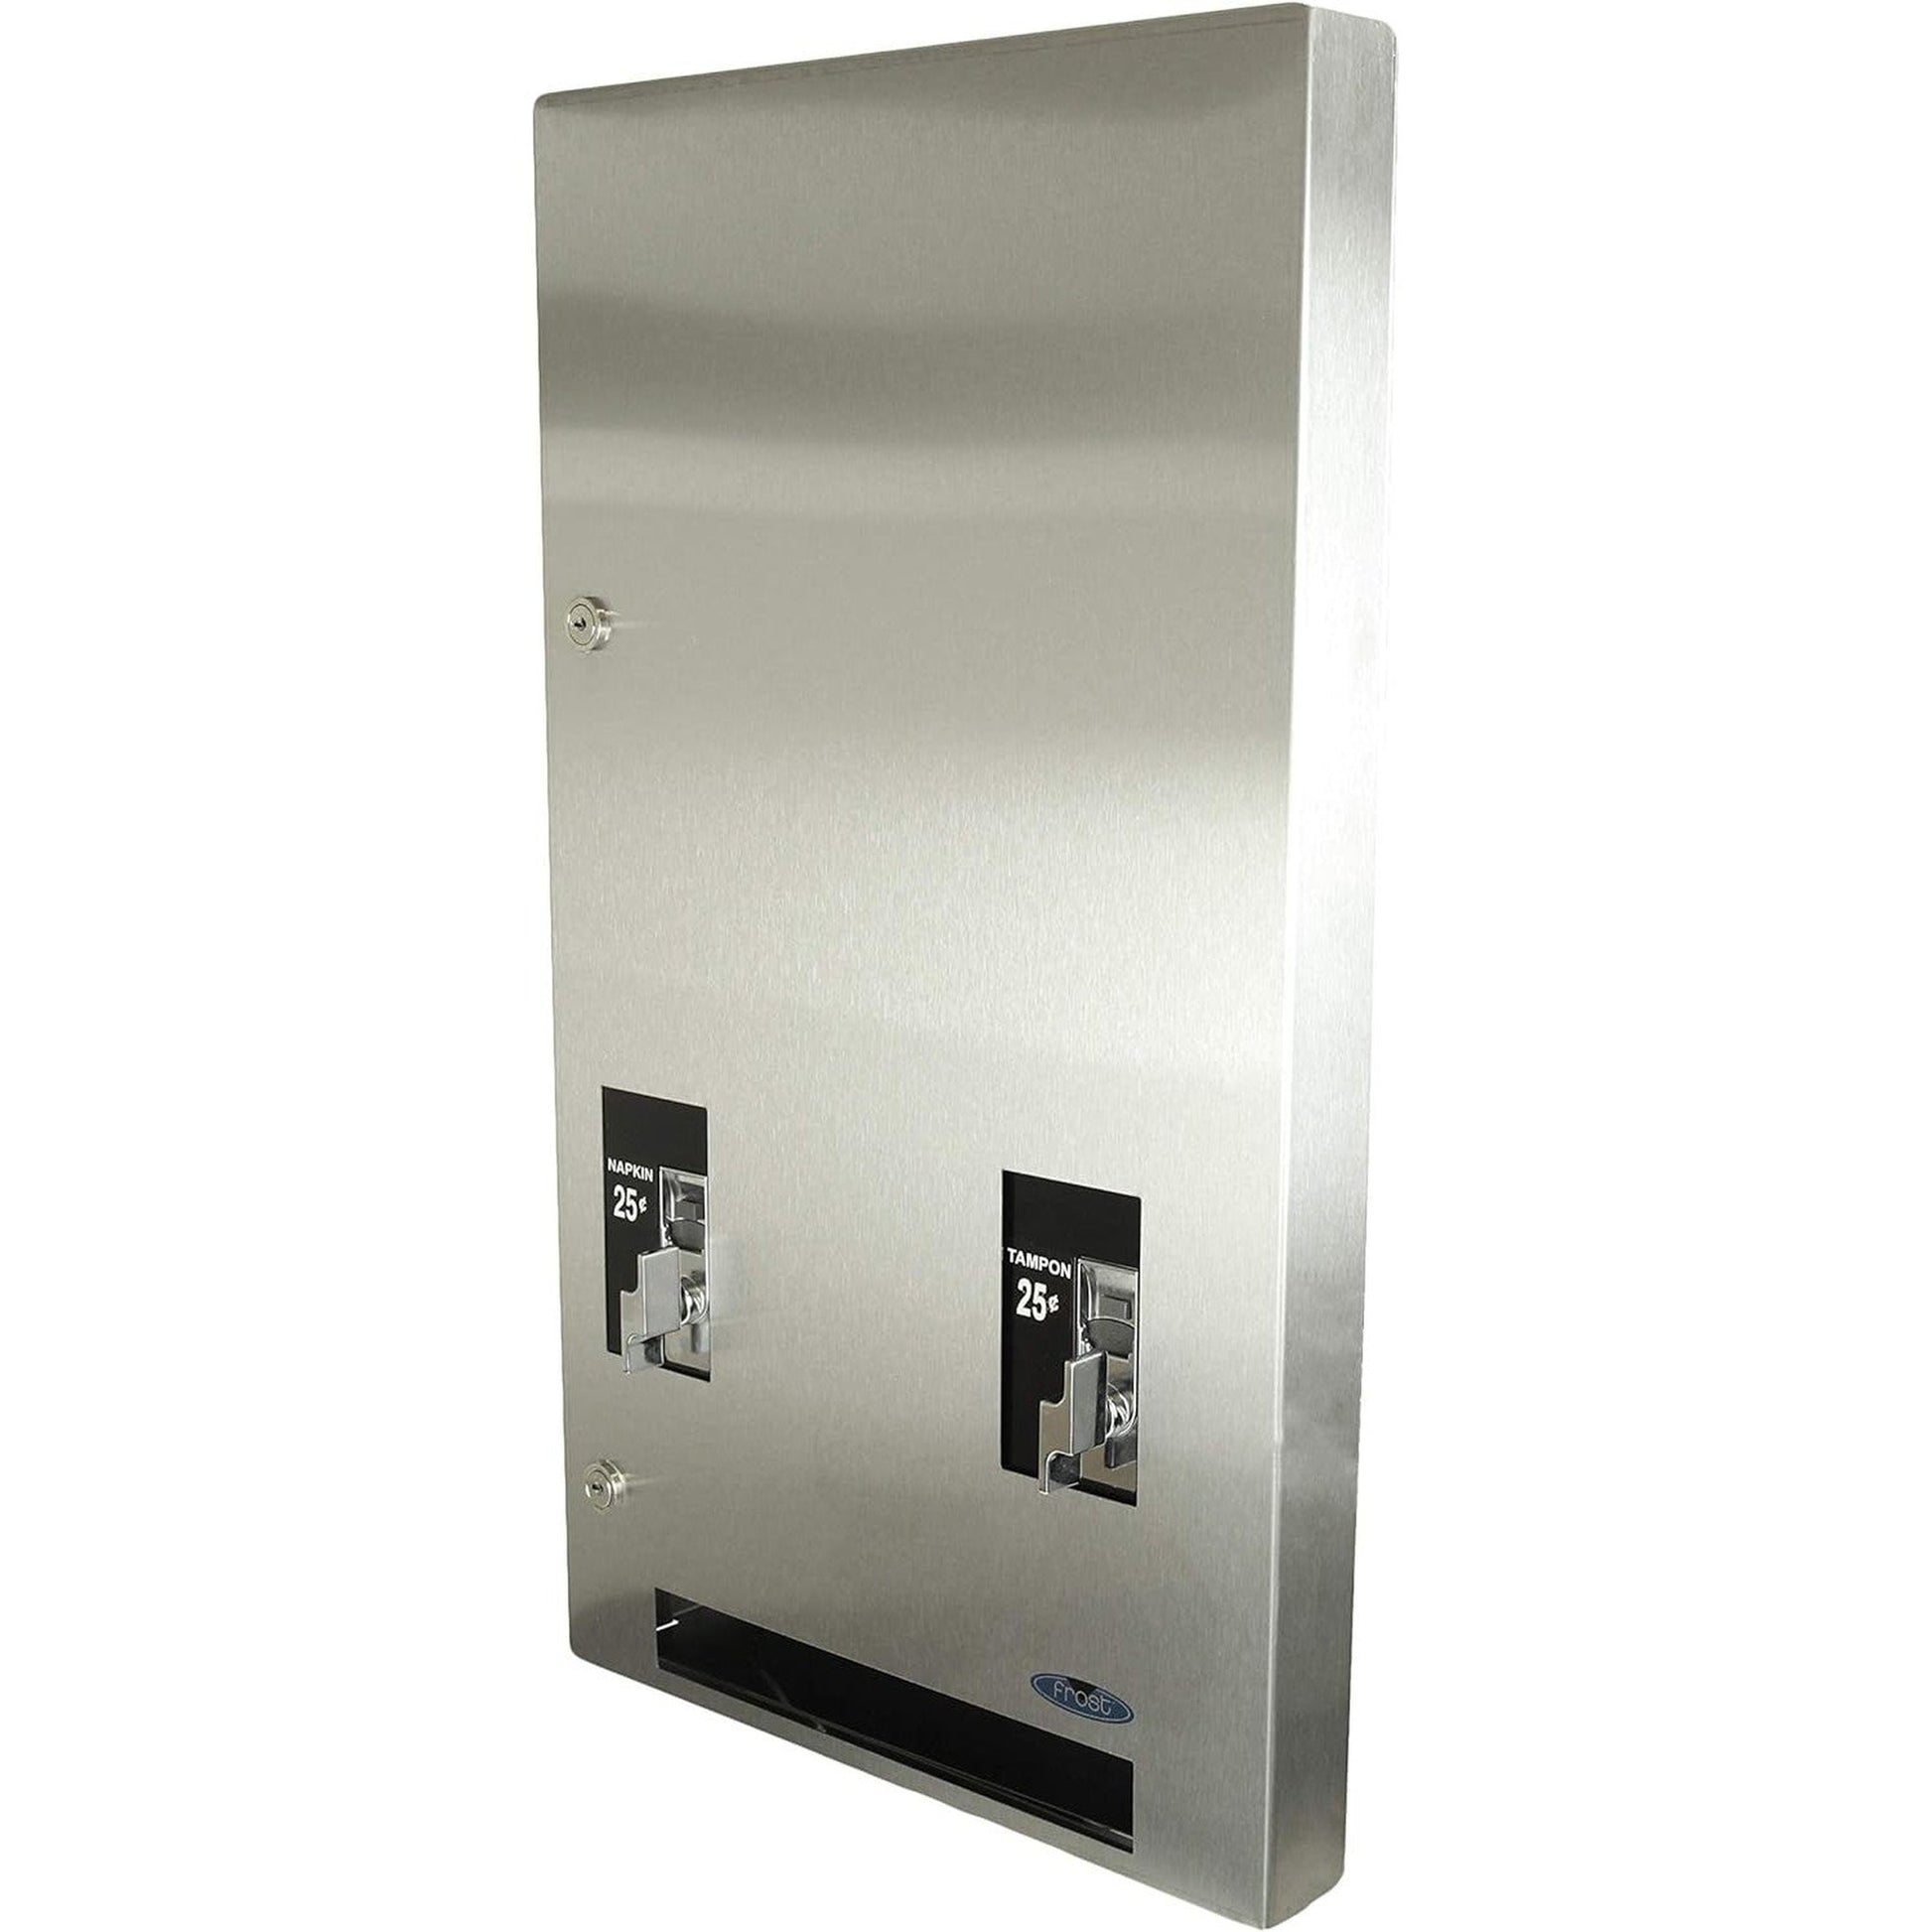 Frost 615-5-0.25 Recessed Stainless Steel Napkin and Tampon Dispenser